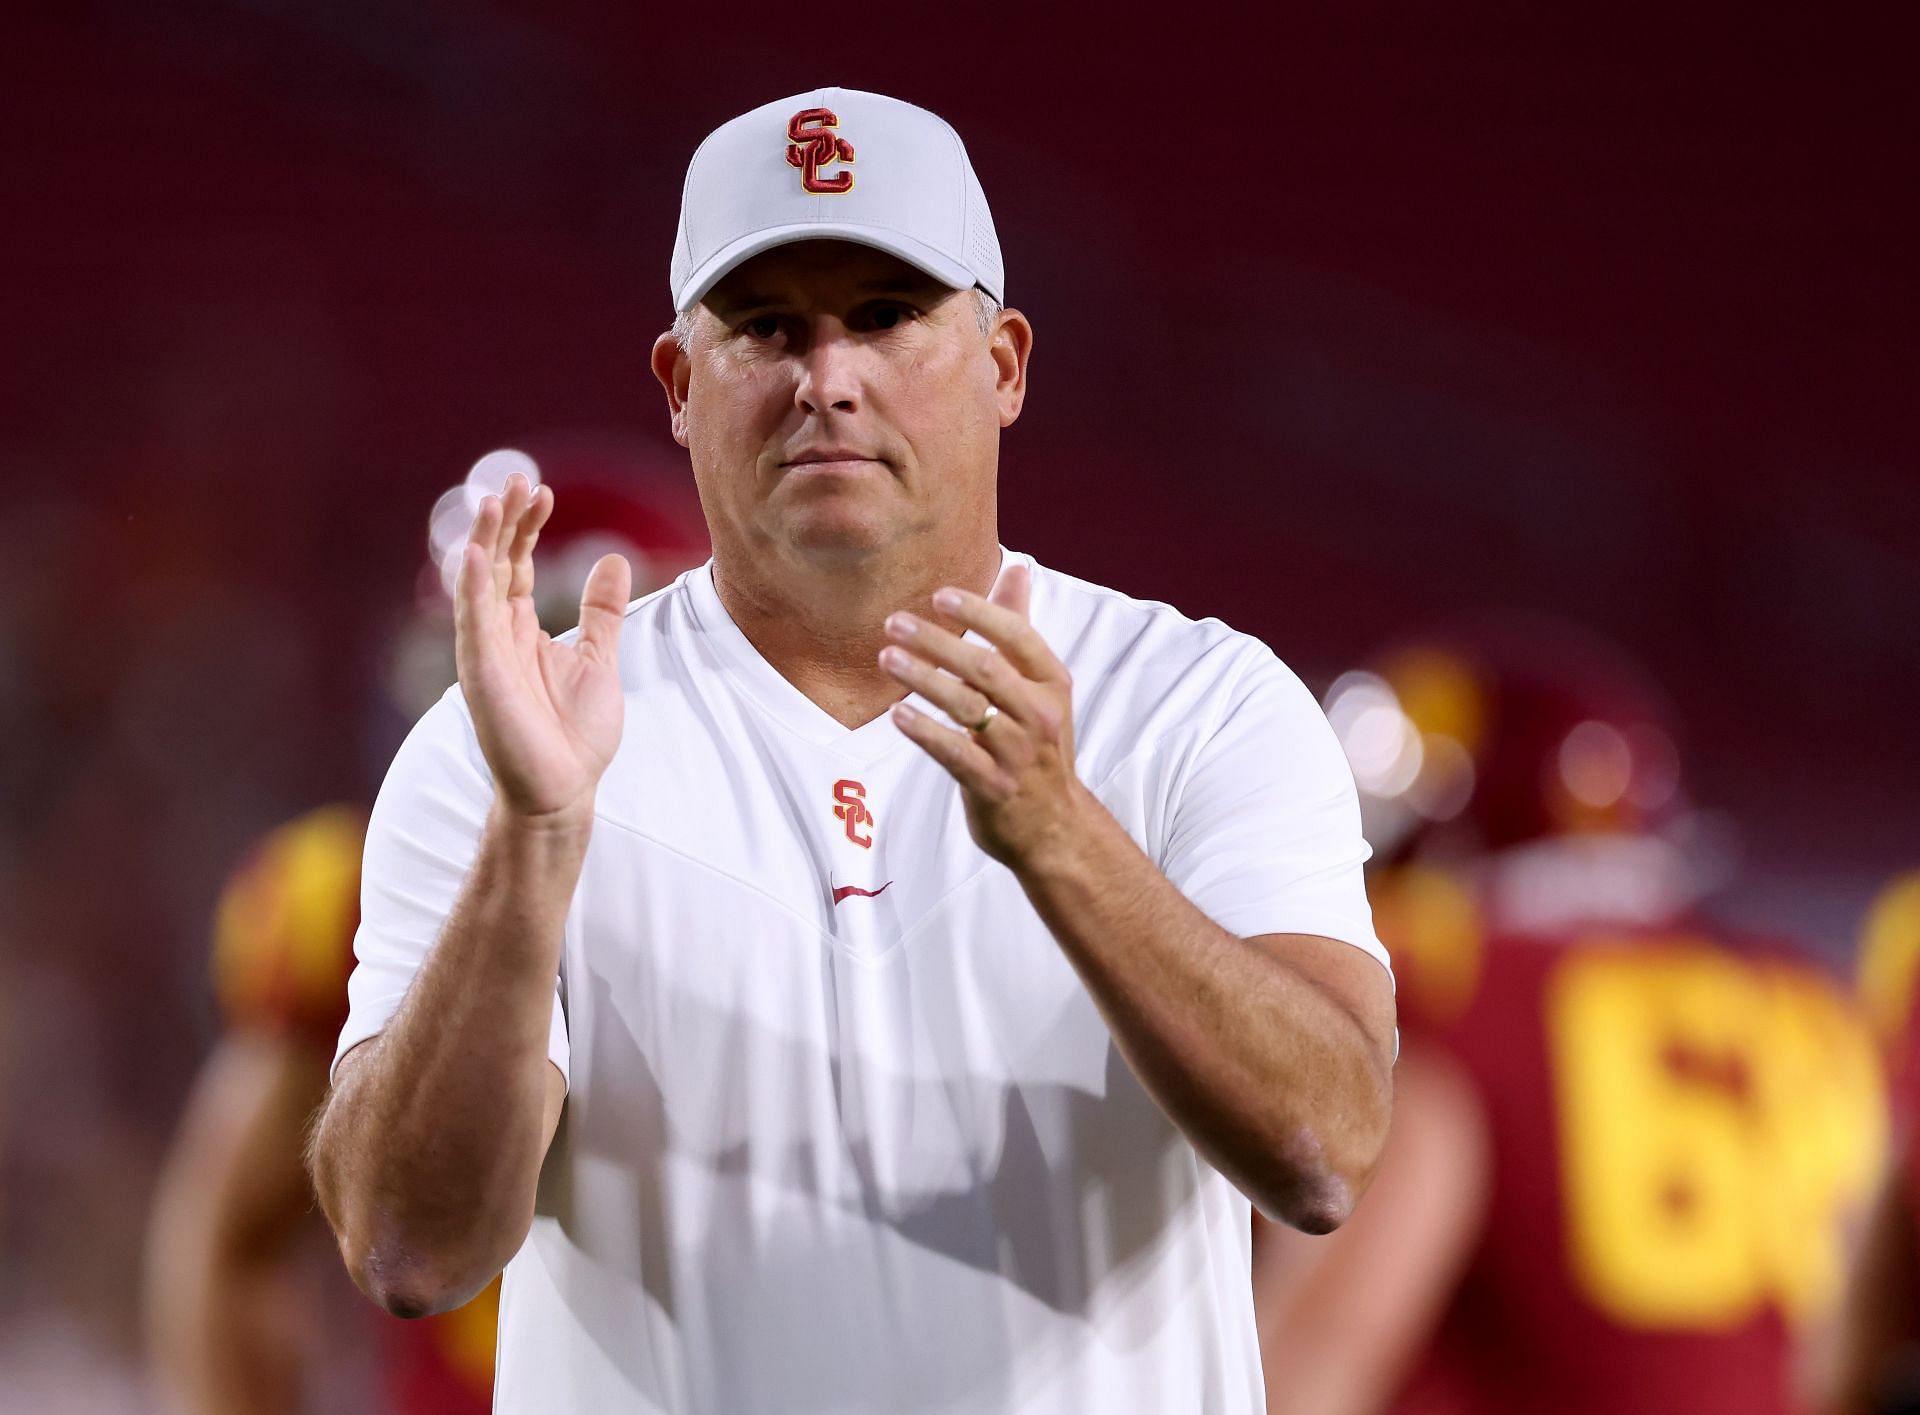 Clay Helton coached Kyle Ford at USC, and might renuite with him at Georgia Southern.